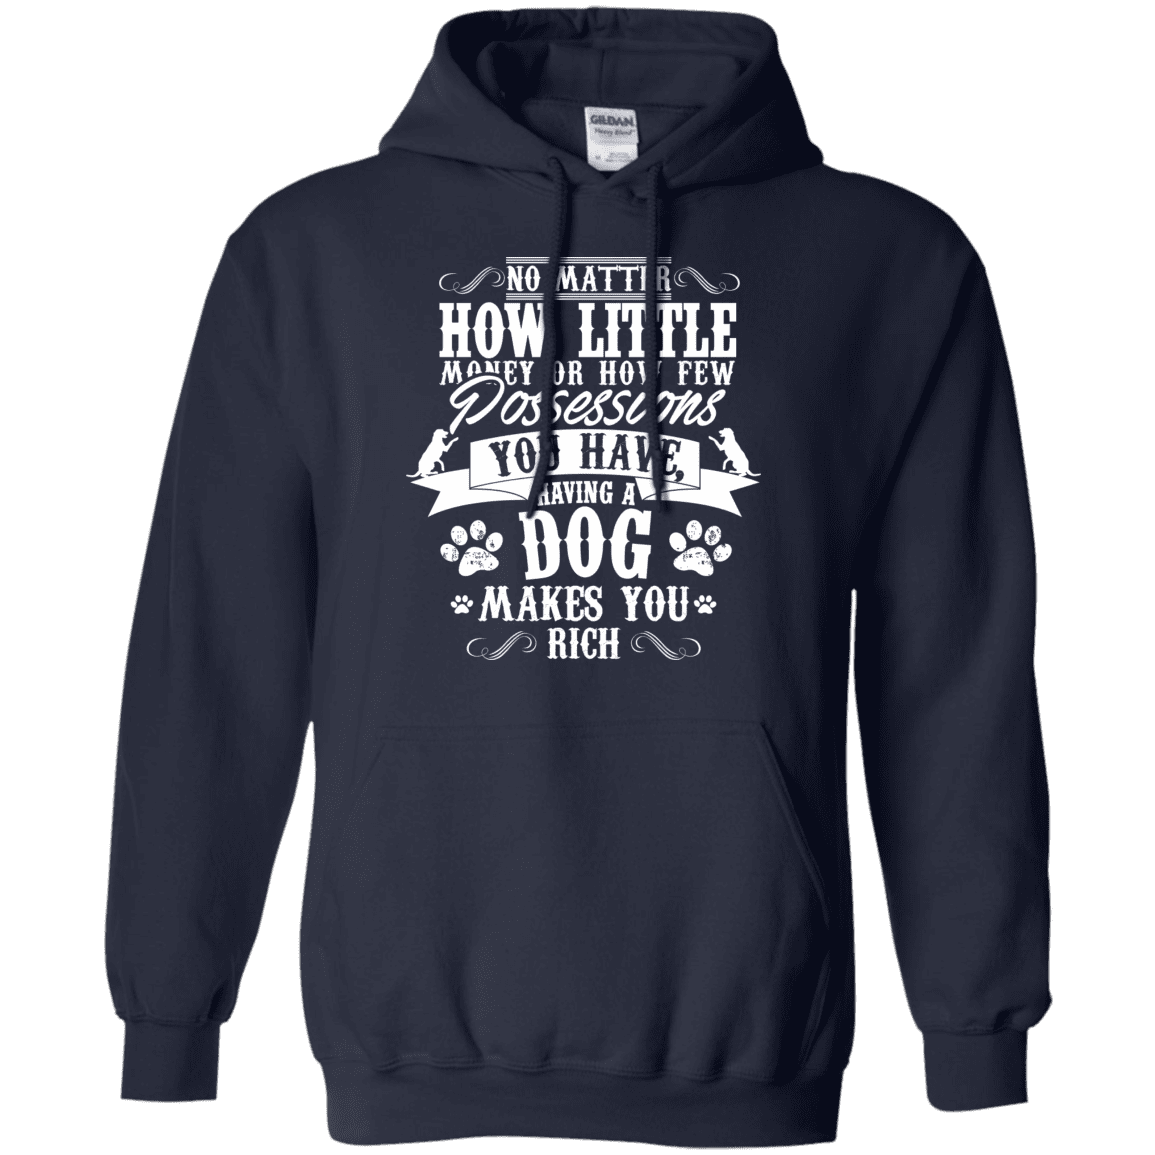 Dogs Make You Rich - Hoodie.